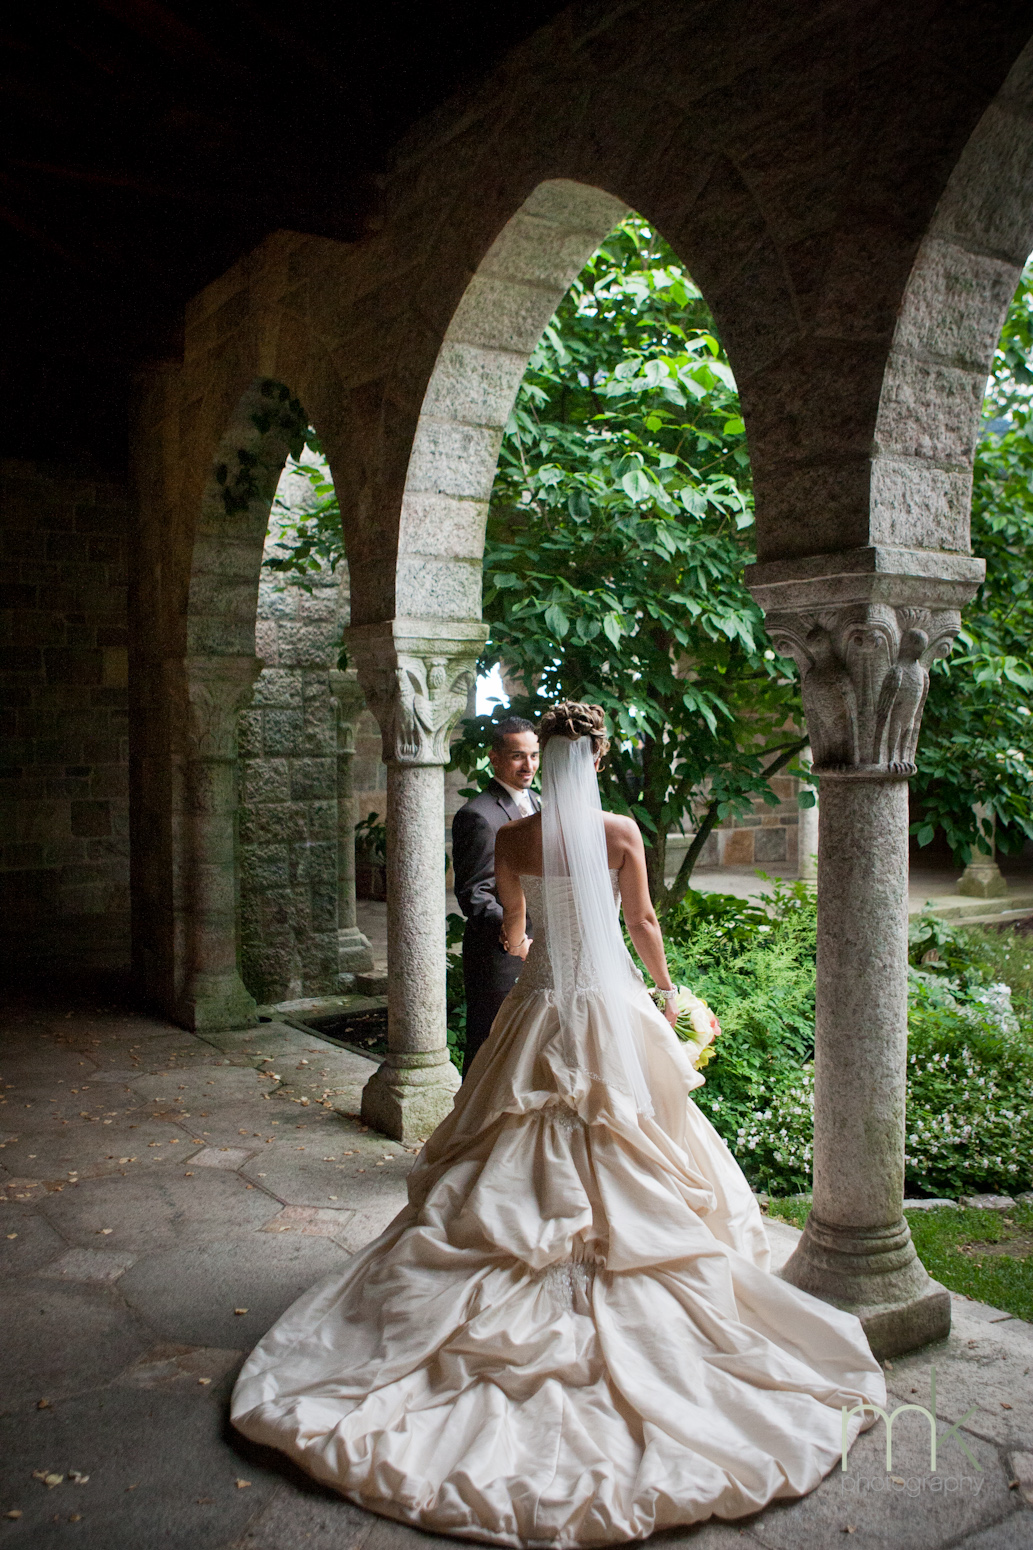 A groom stands facing the camera, and the bride stands with her back to the camera. Her ballgown style dress flows out behind her as they stand in Glencairn Museum's cloister.